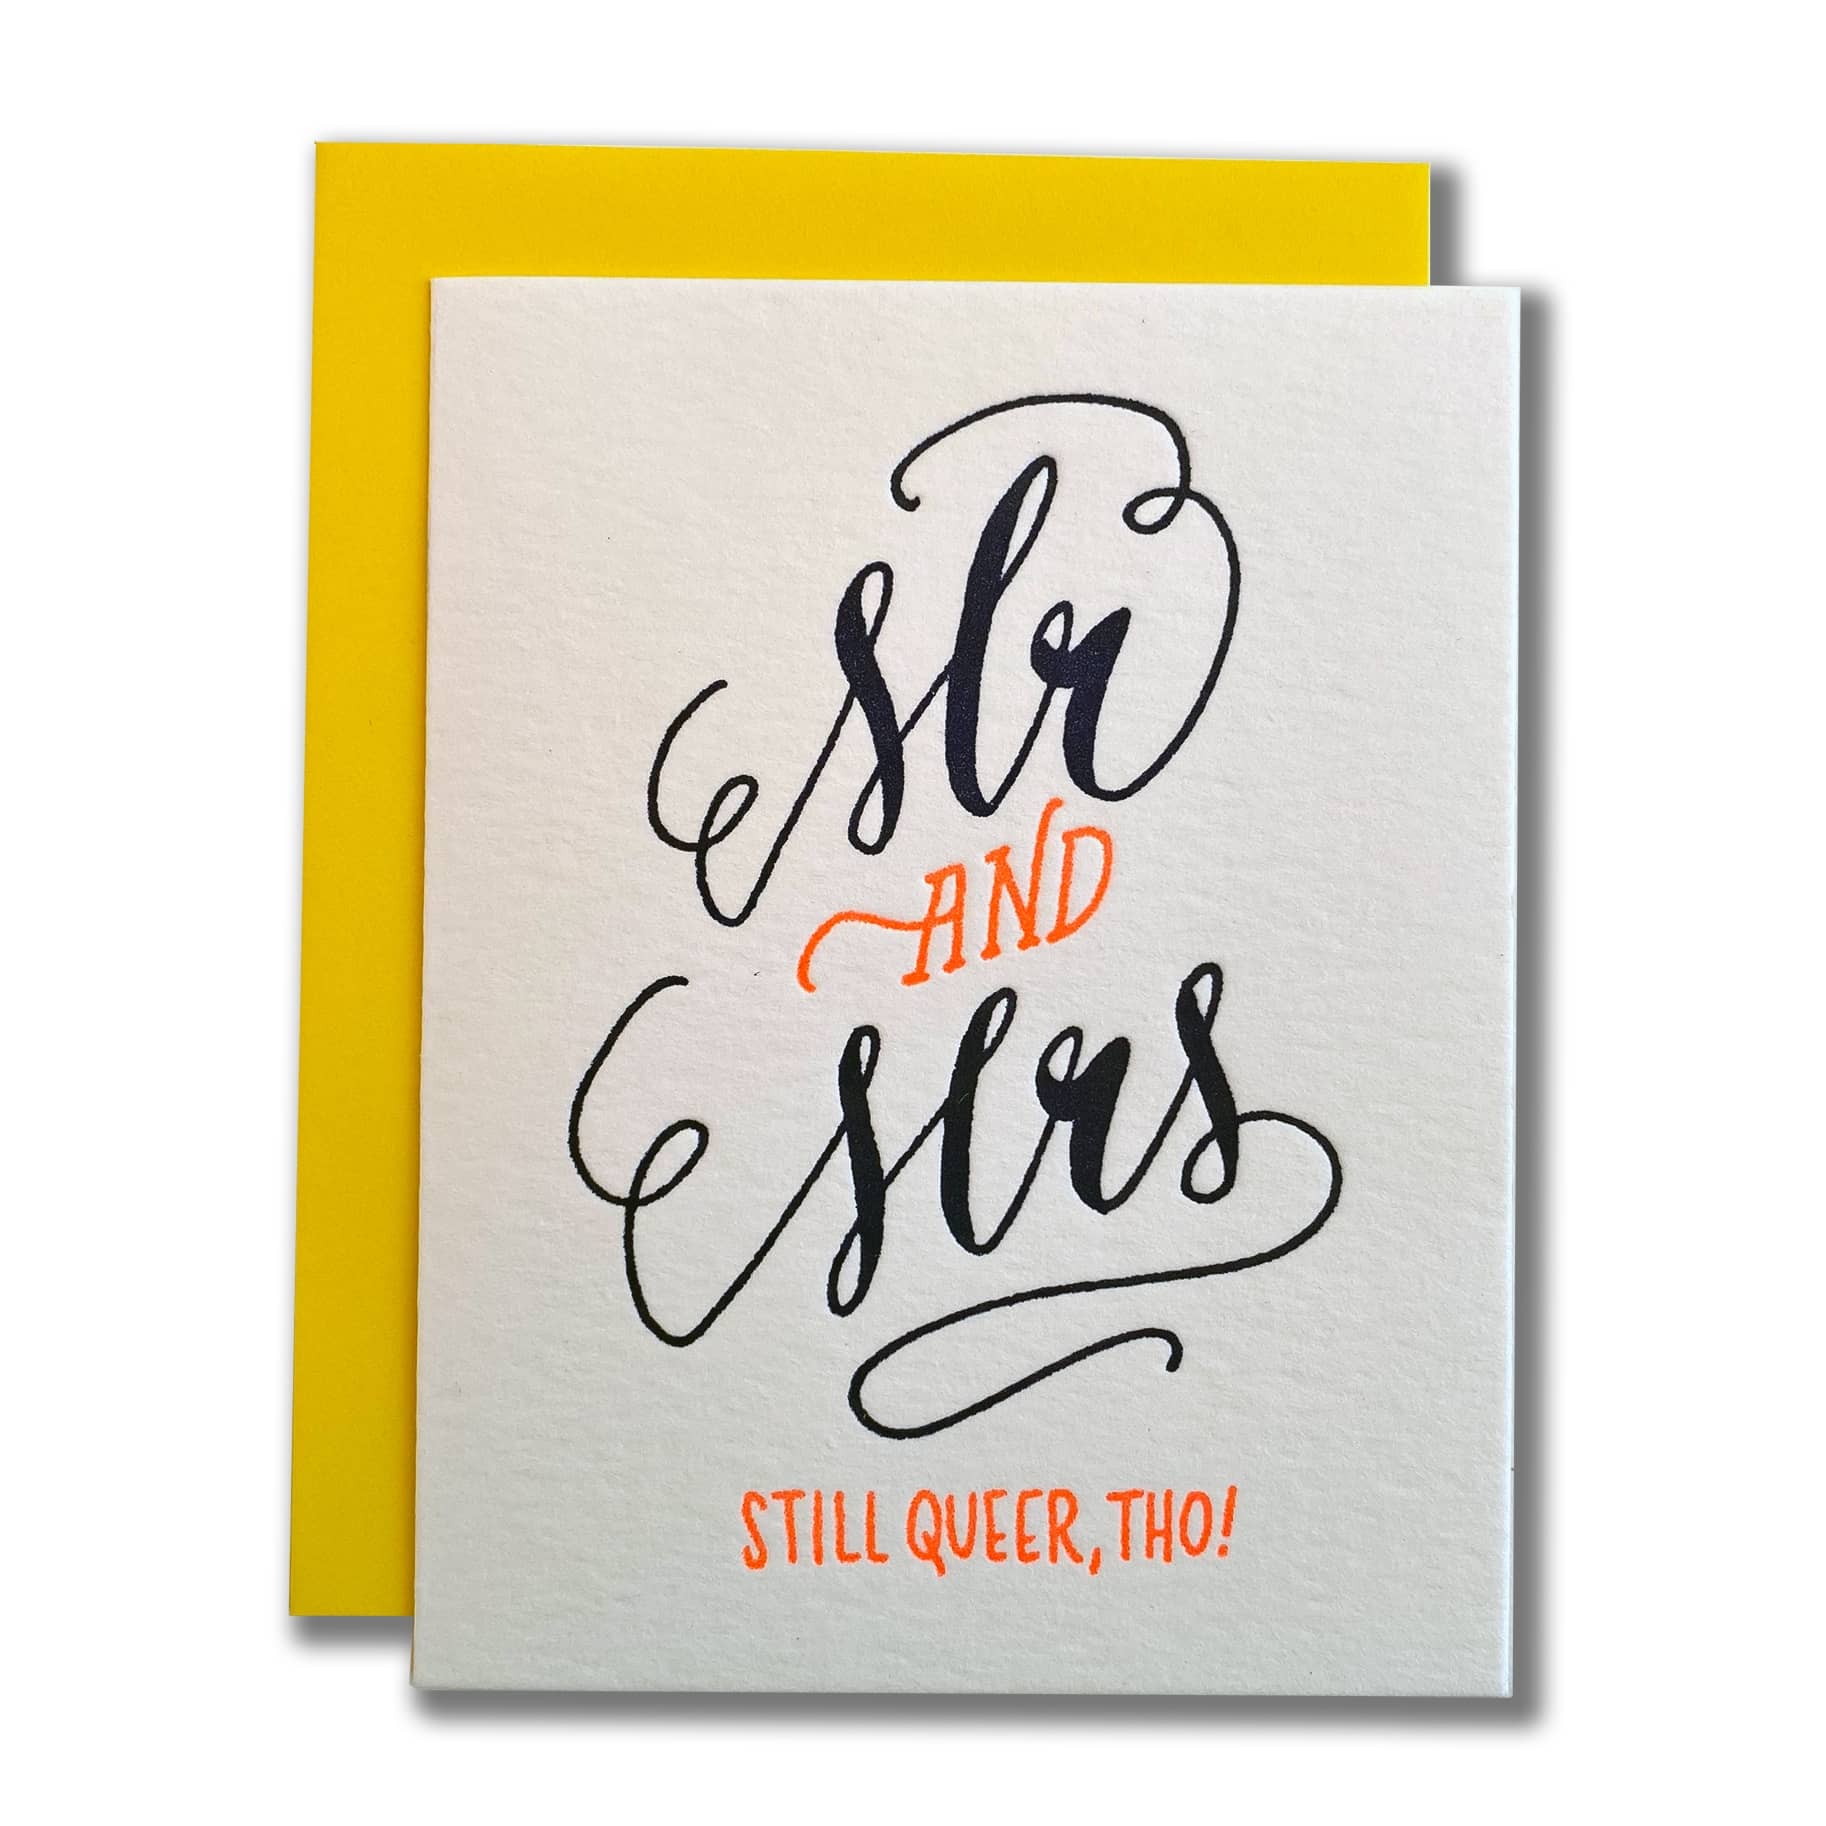 Greeting Cards by Ladyfingers Letterpress